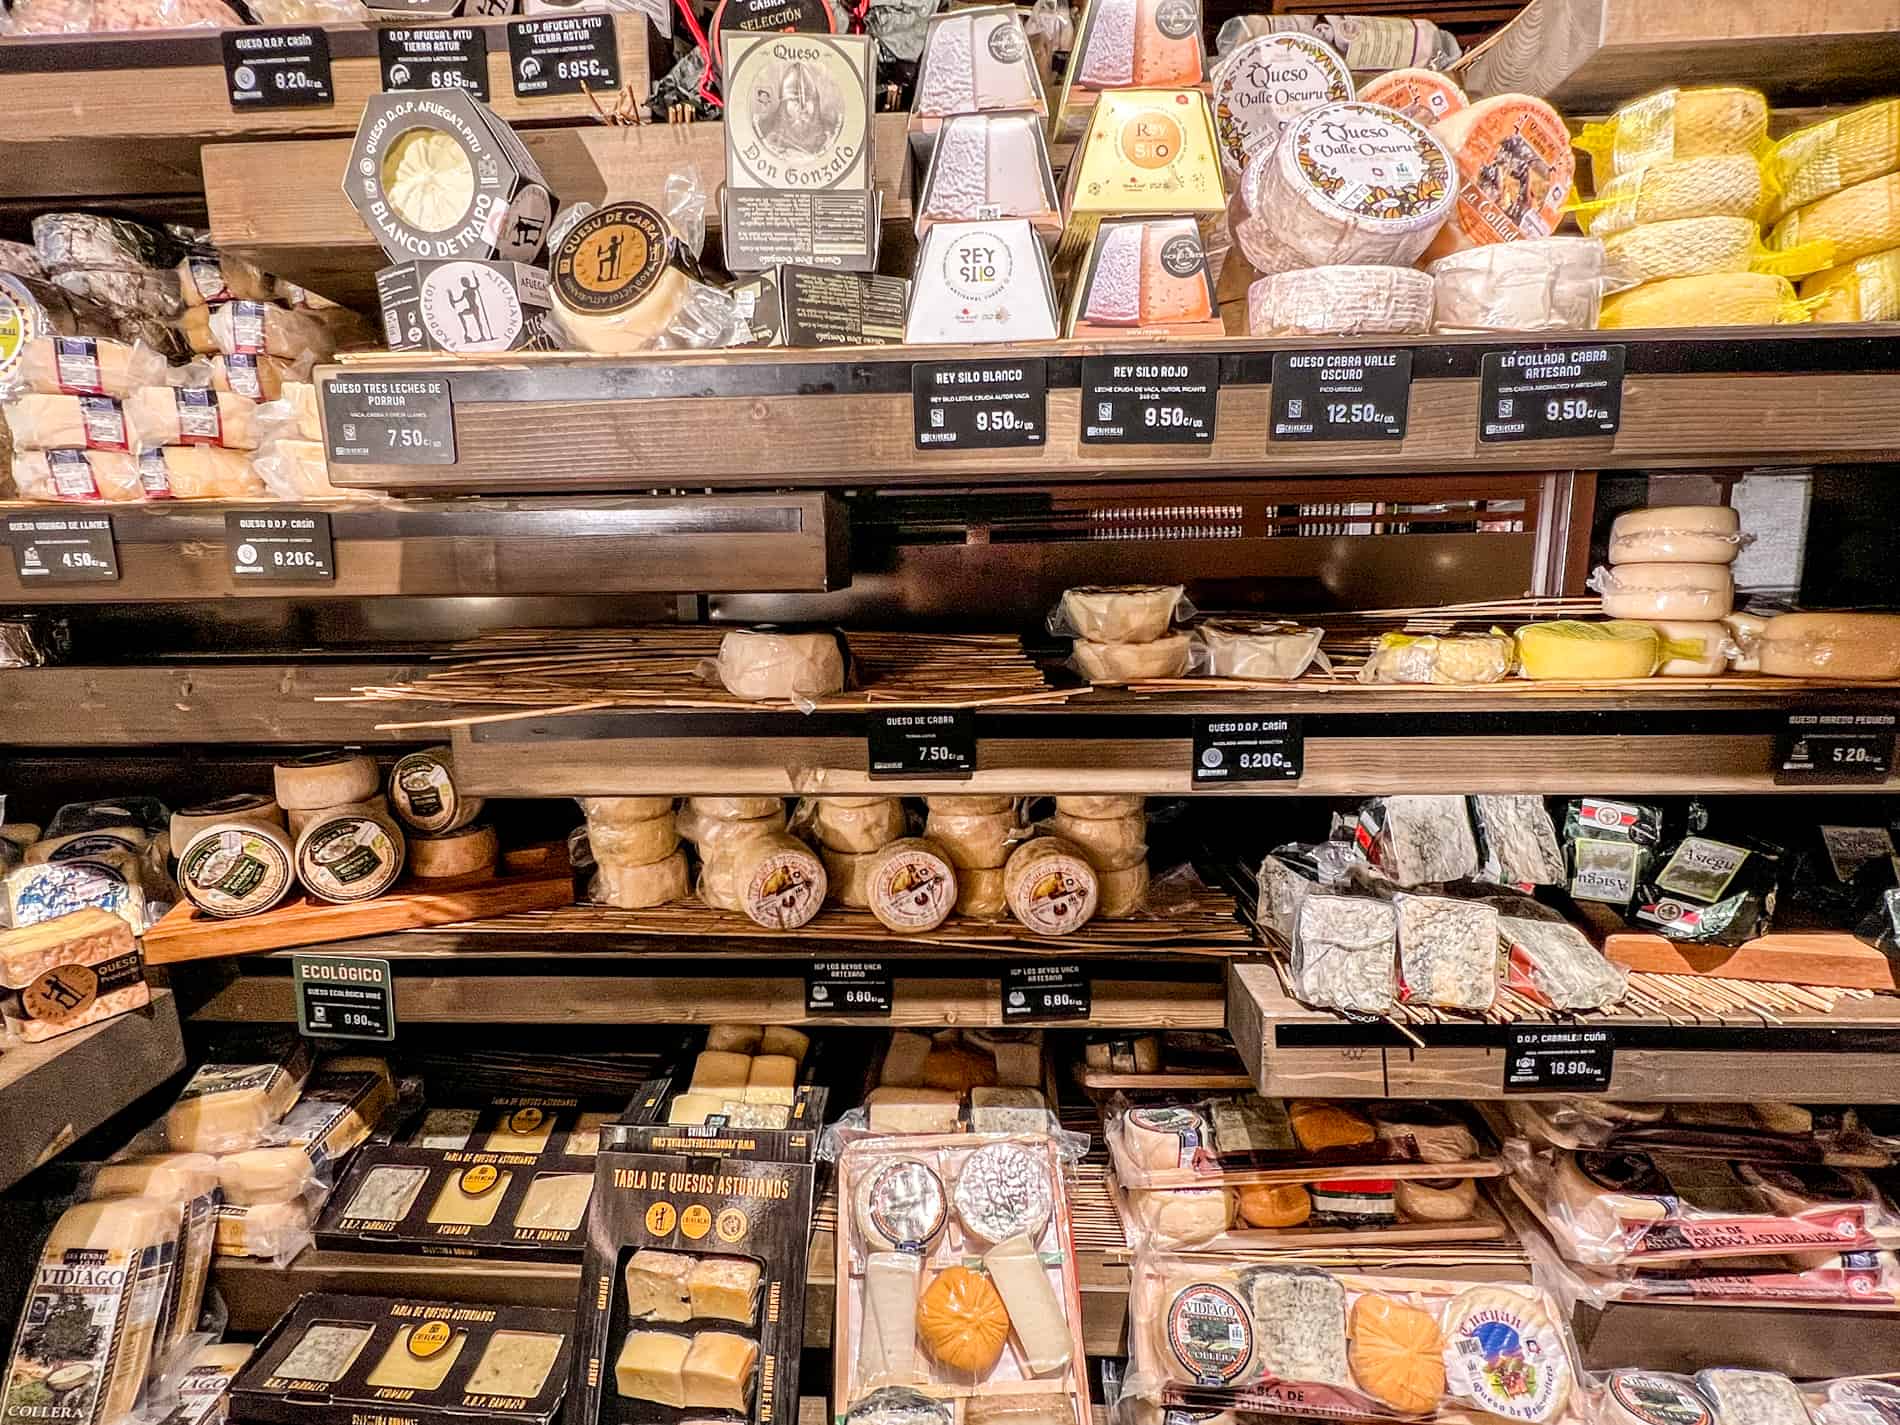 A selection of packaged cheeses on wooden shelving in Oviedo, Asturias, known as 'El Pais de Los 40 Quesos' (the land of 40 cheeses).